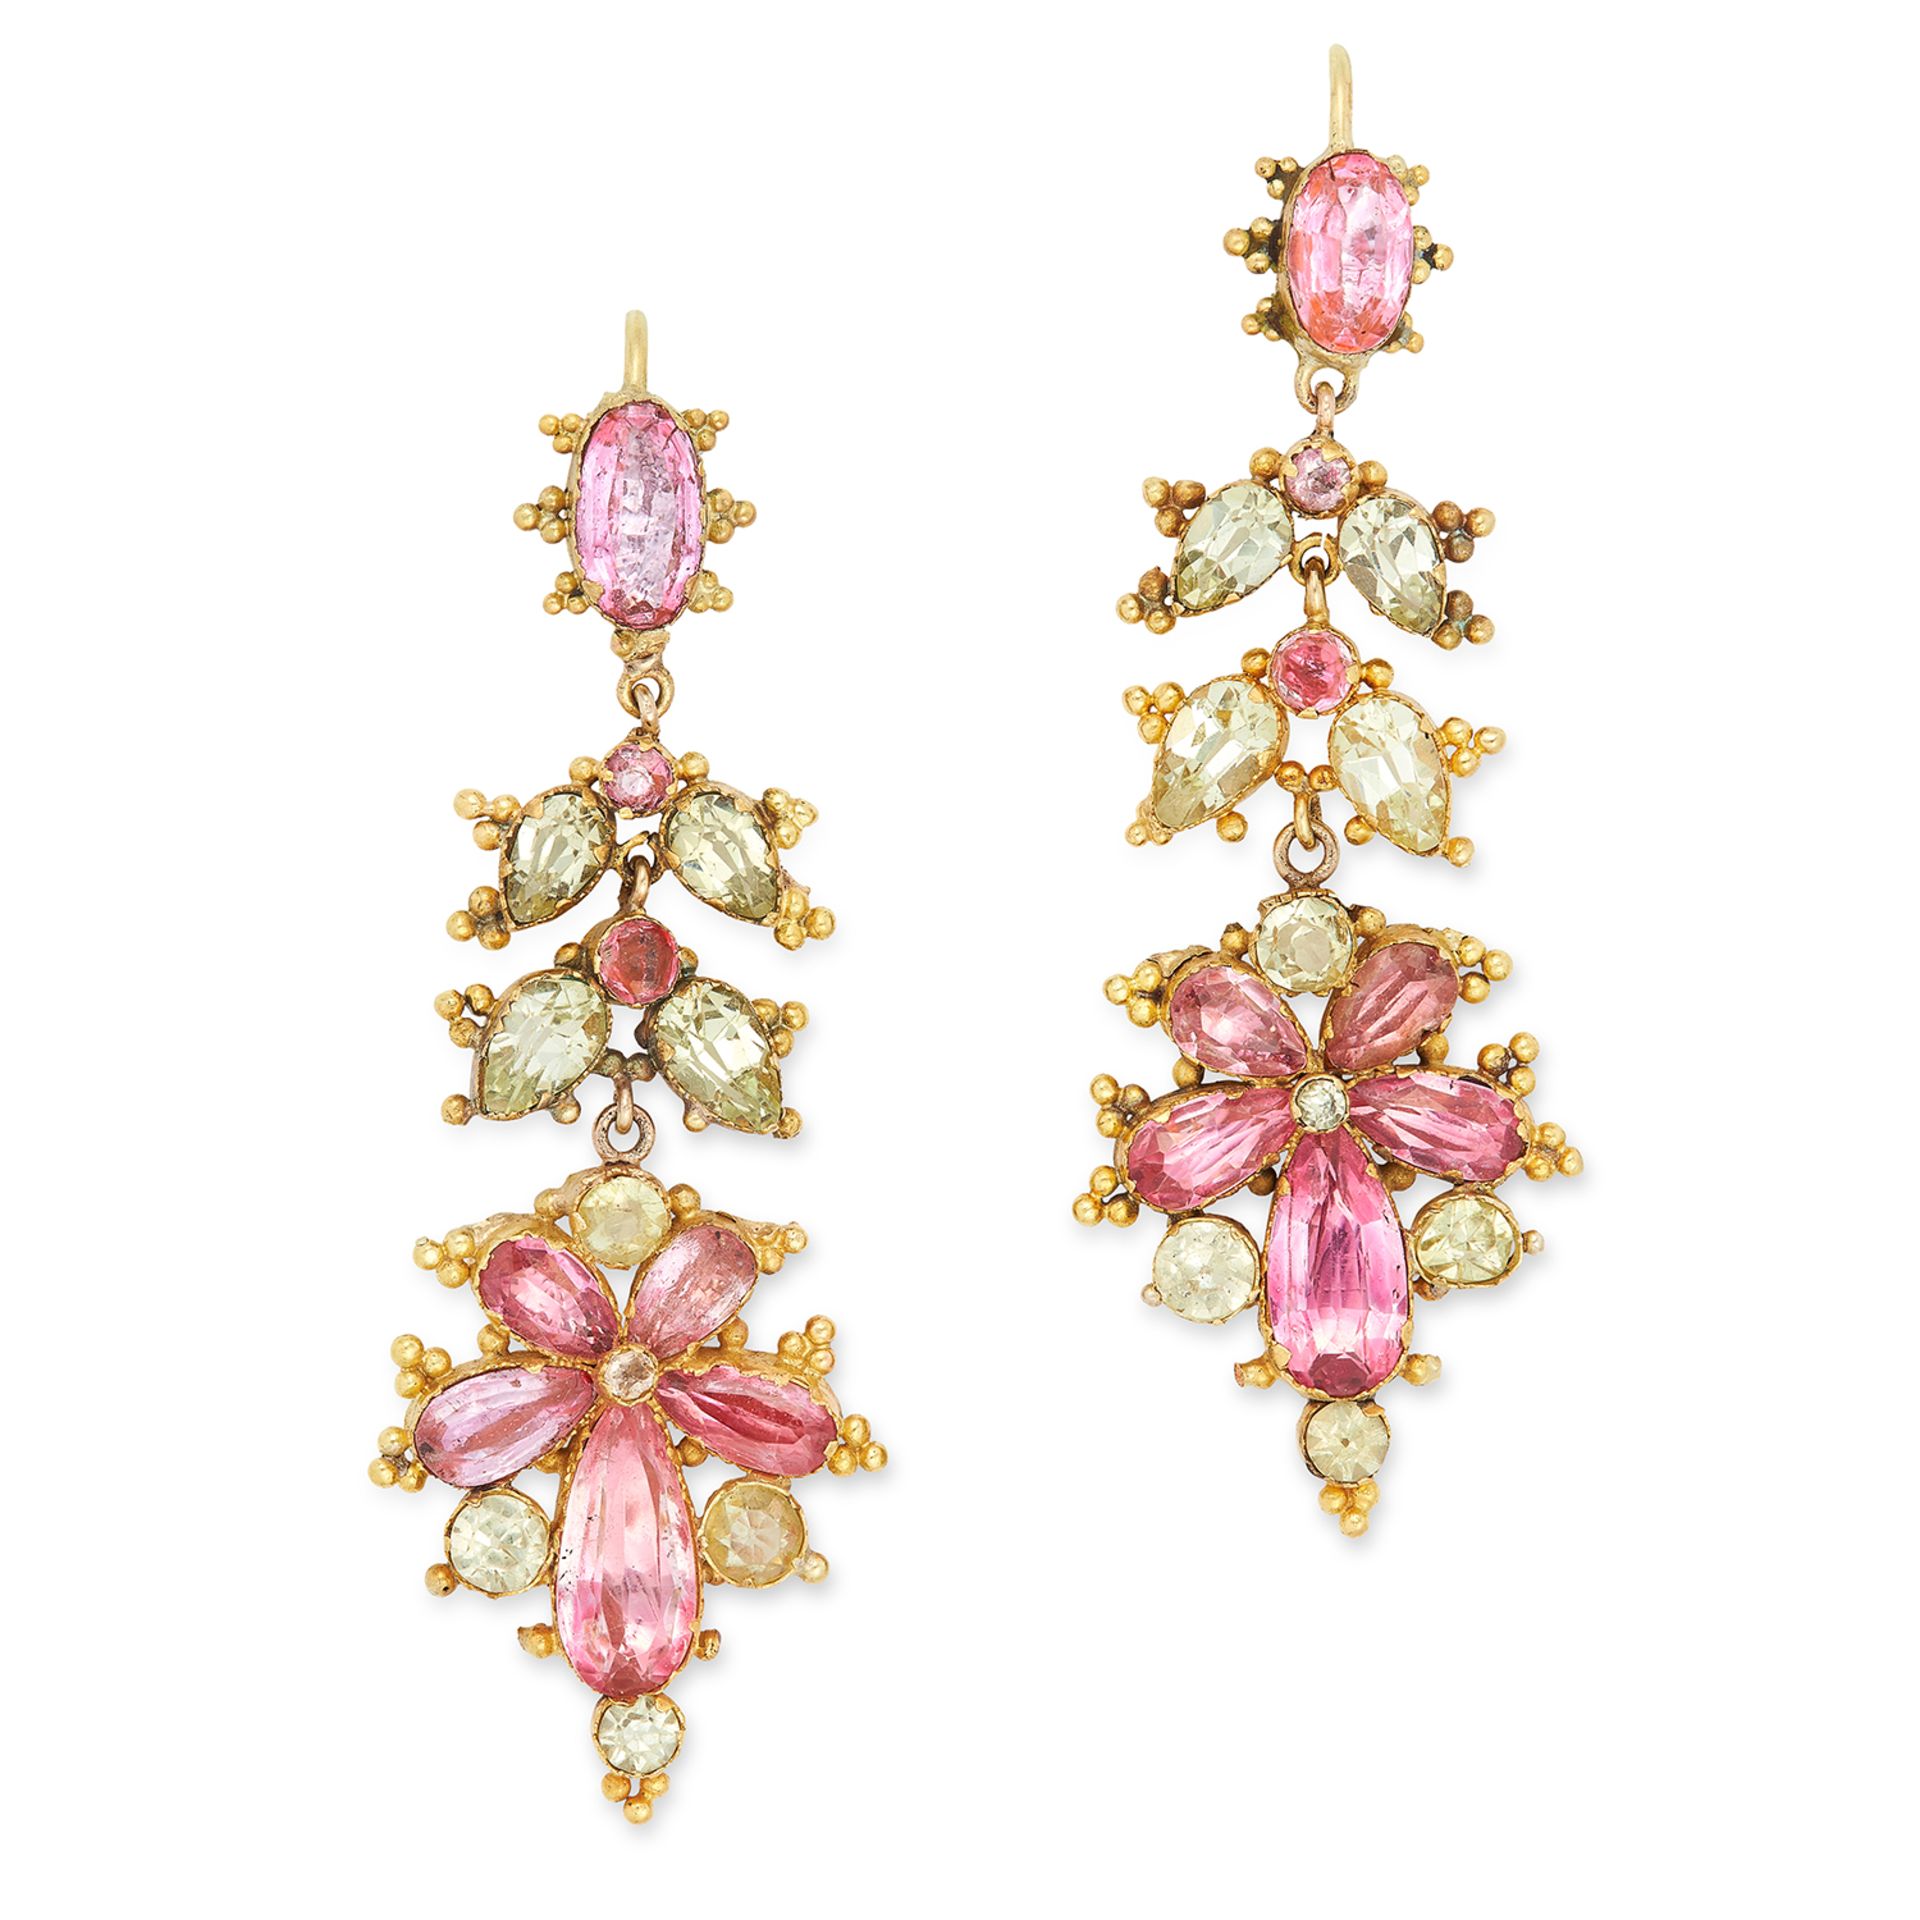 ANTIQUE PINK TOPAZ AND CHRYSOBERYL EARRINGS set with round, oval and pear cut pink topaz and